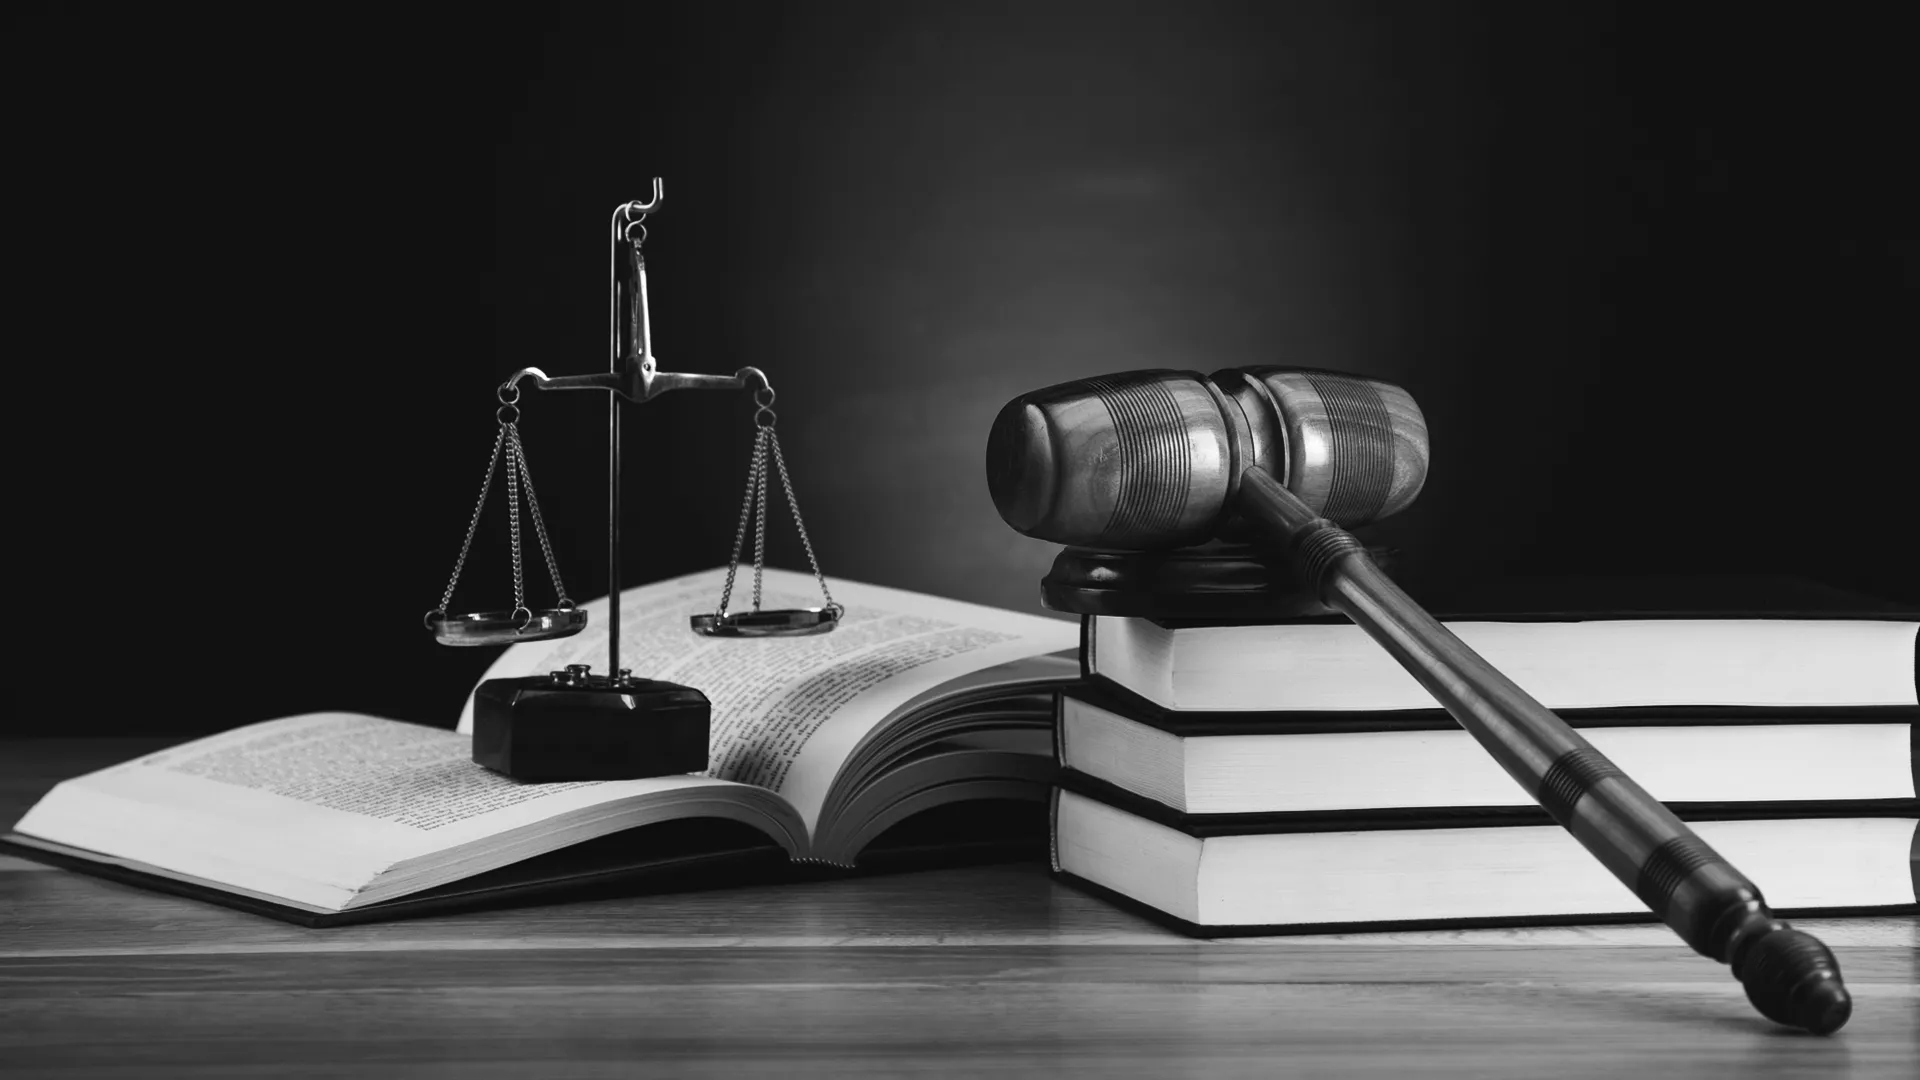 Scales of Justice, book and gavel illustrating criminal justice